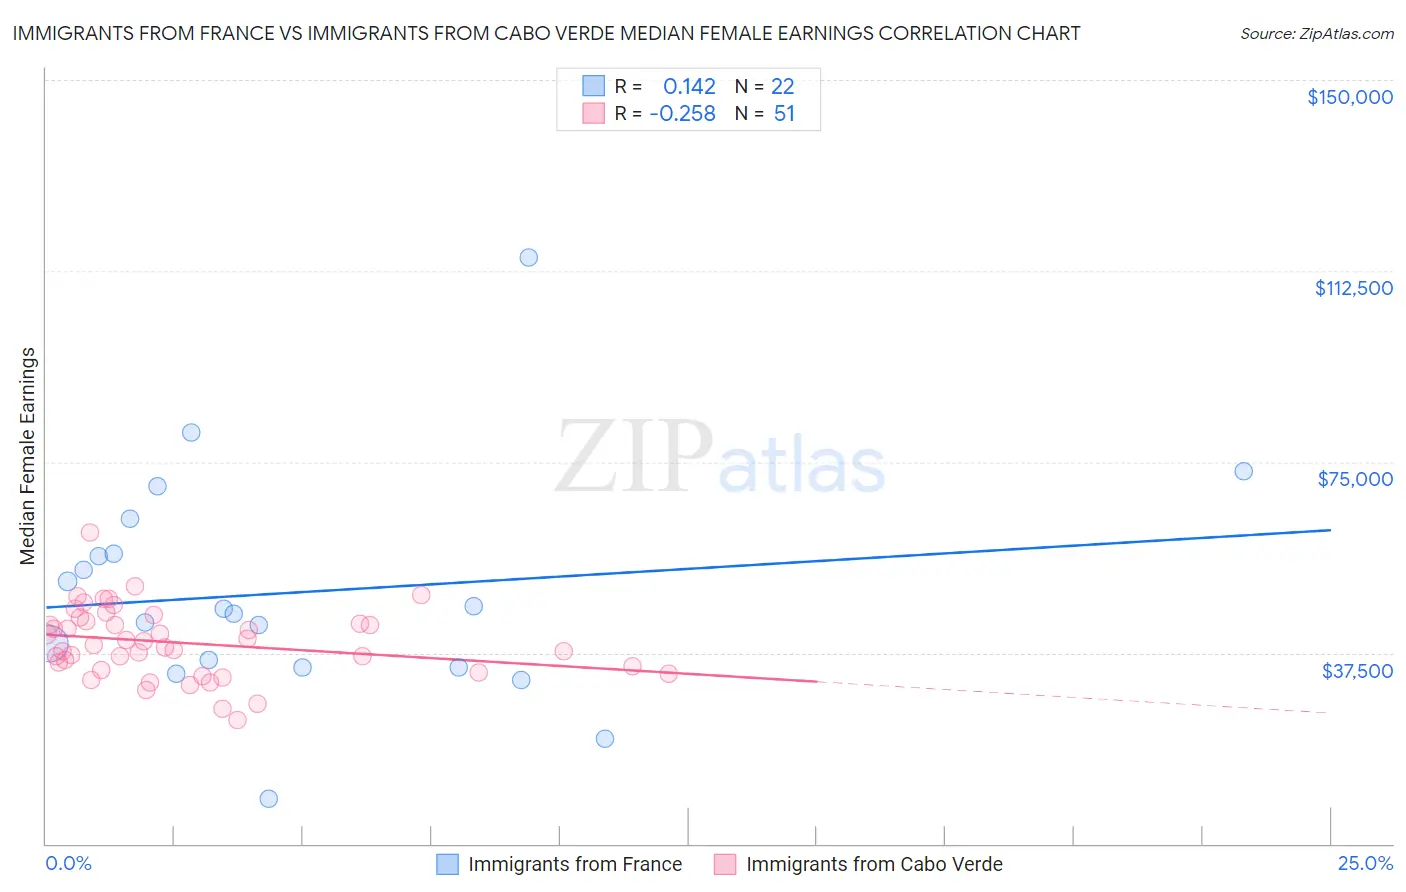 Immigrants from France vs Immigrants from Cabo Verde Median Female Earnings